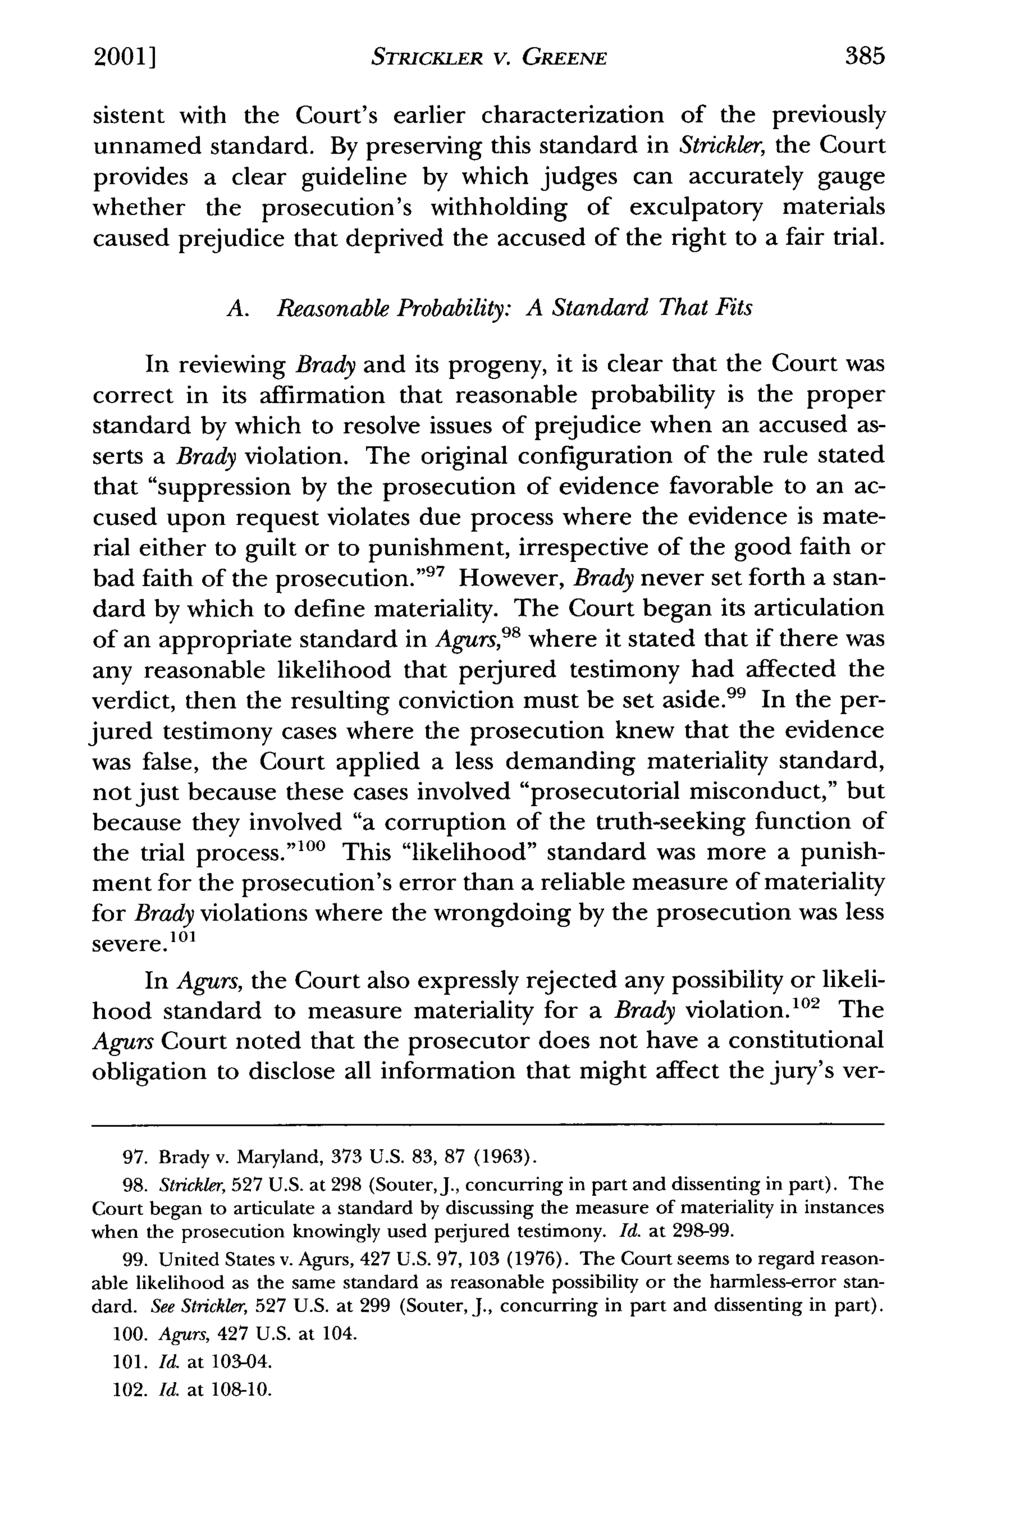 2001] STRICKLER V. GREENE sistent with the Court's earlier characterization of the previously unnamed standard.